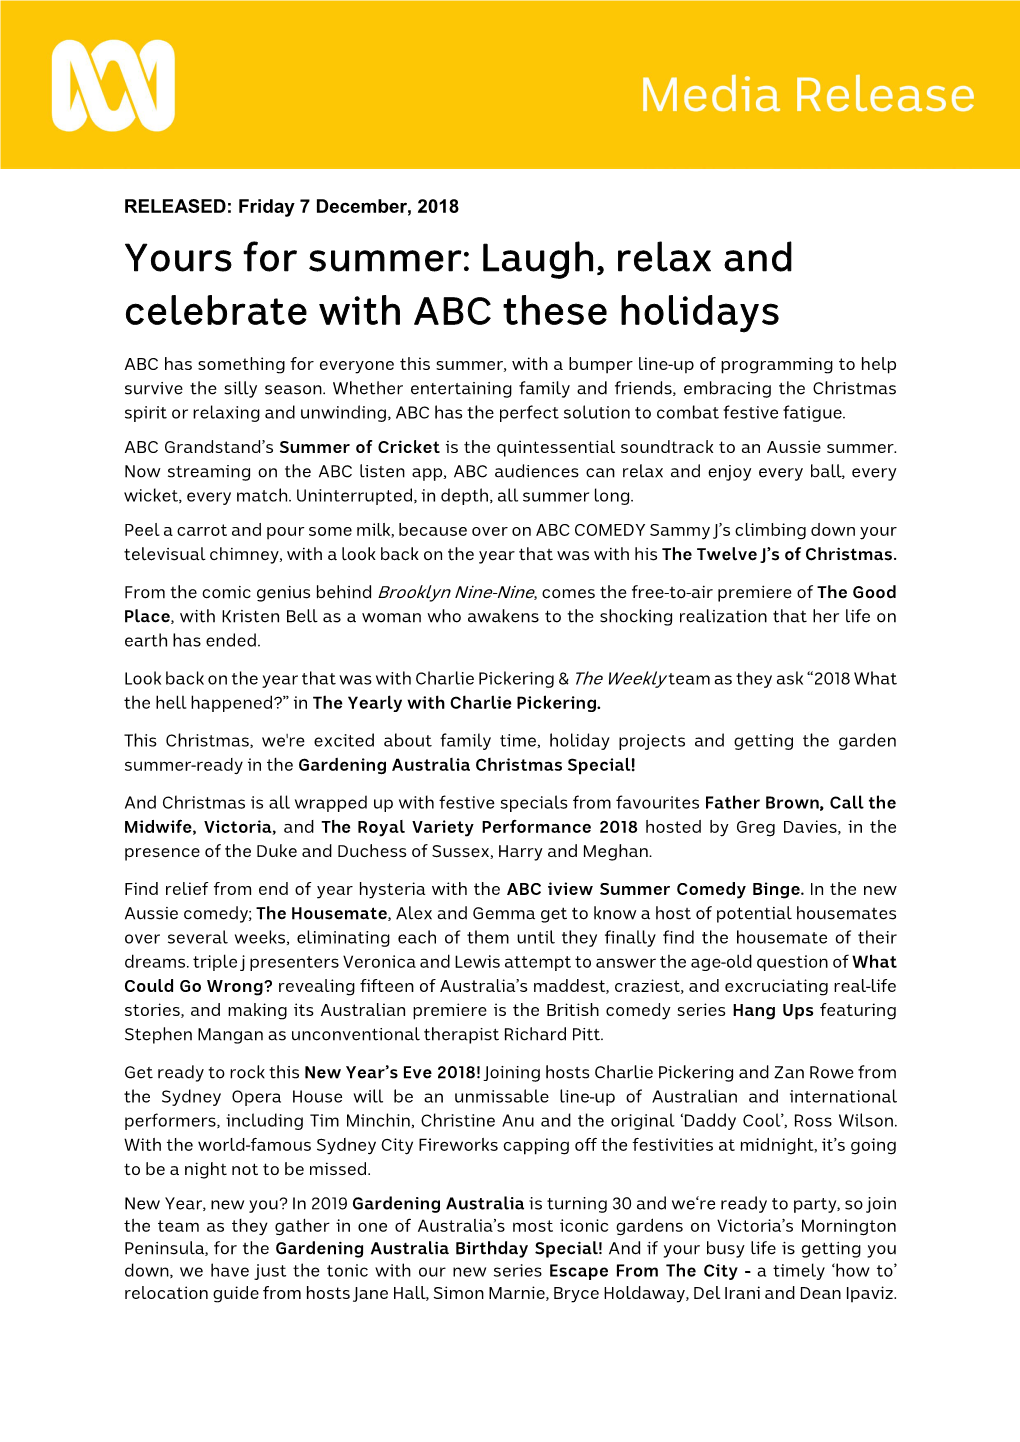 Yours for Summer: Laugh, Relax and Celebrate with ABC These Holidays